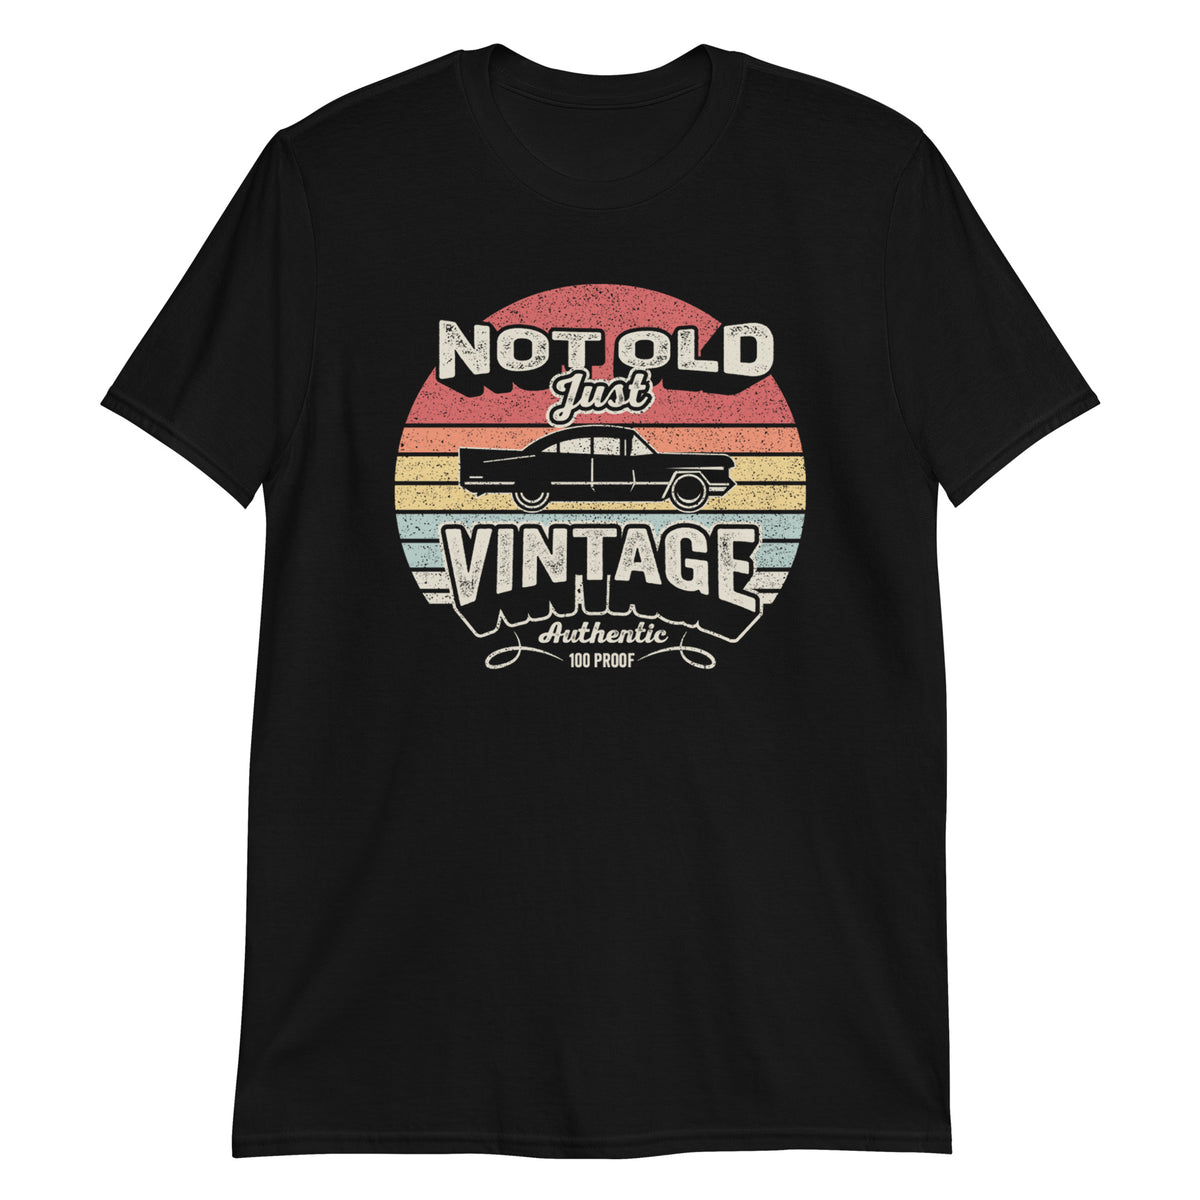 Not Old Just Vintage Authentic T-Shirt